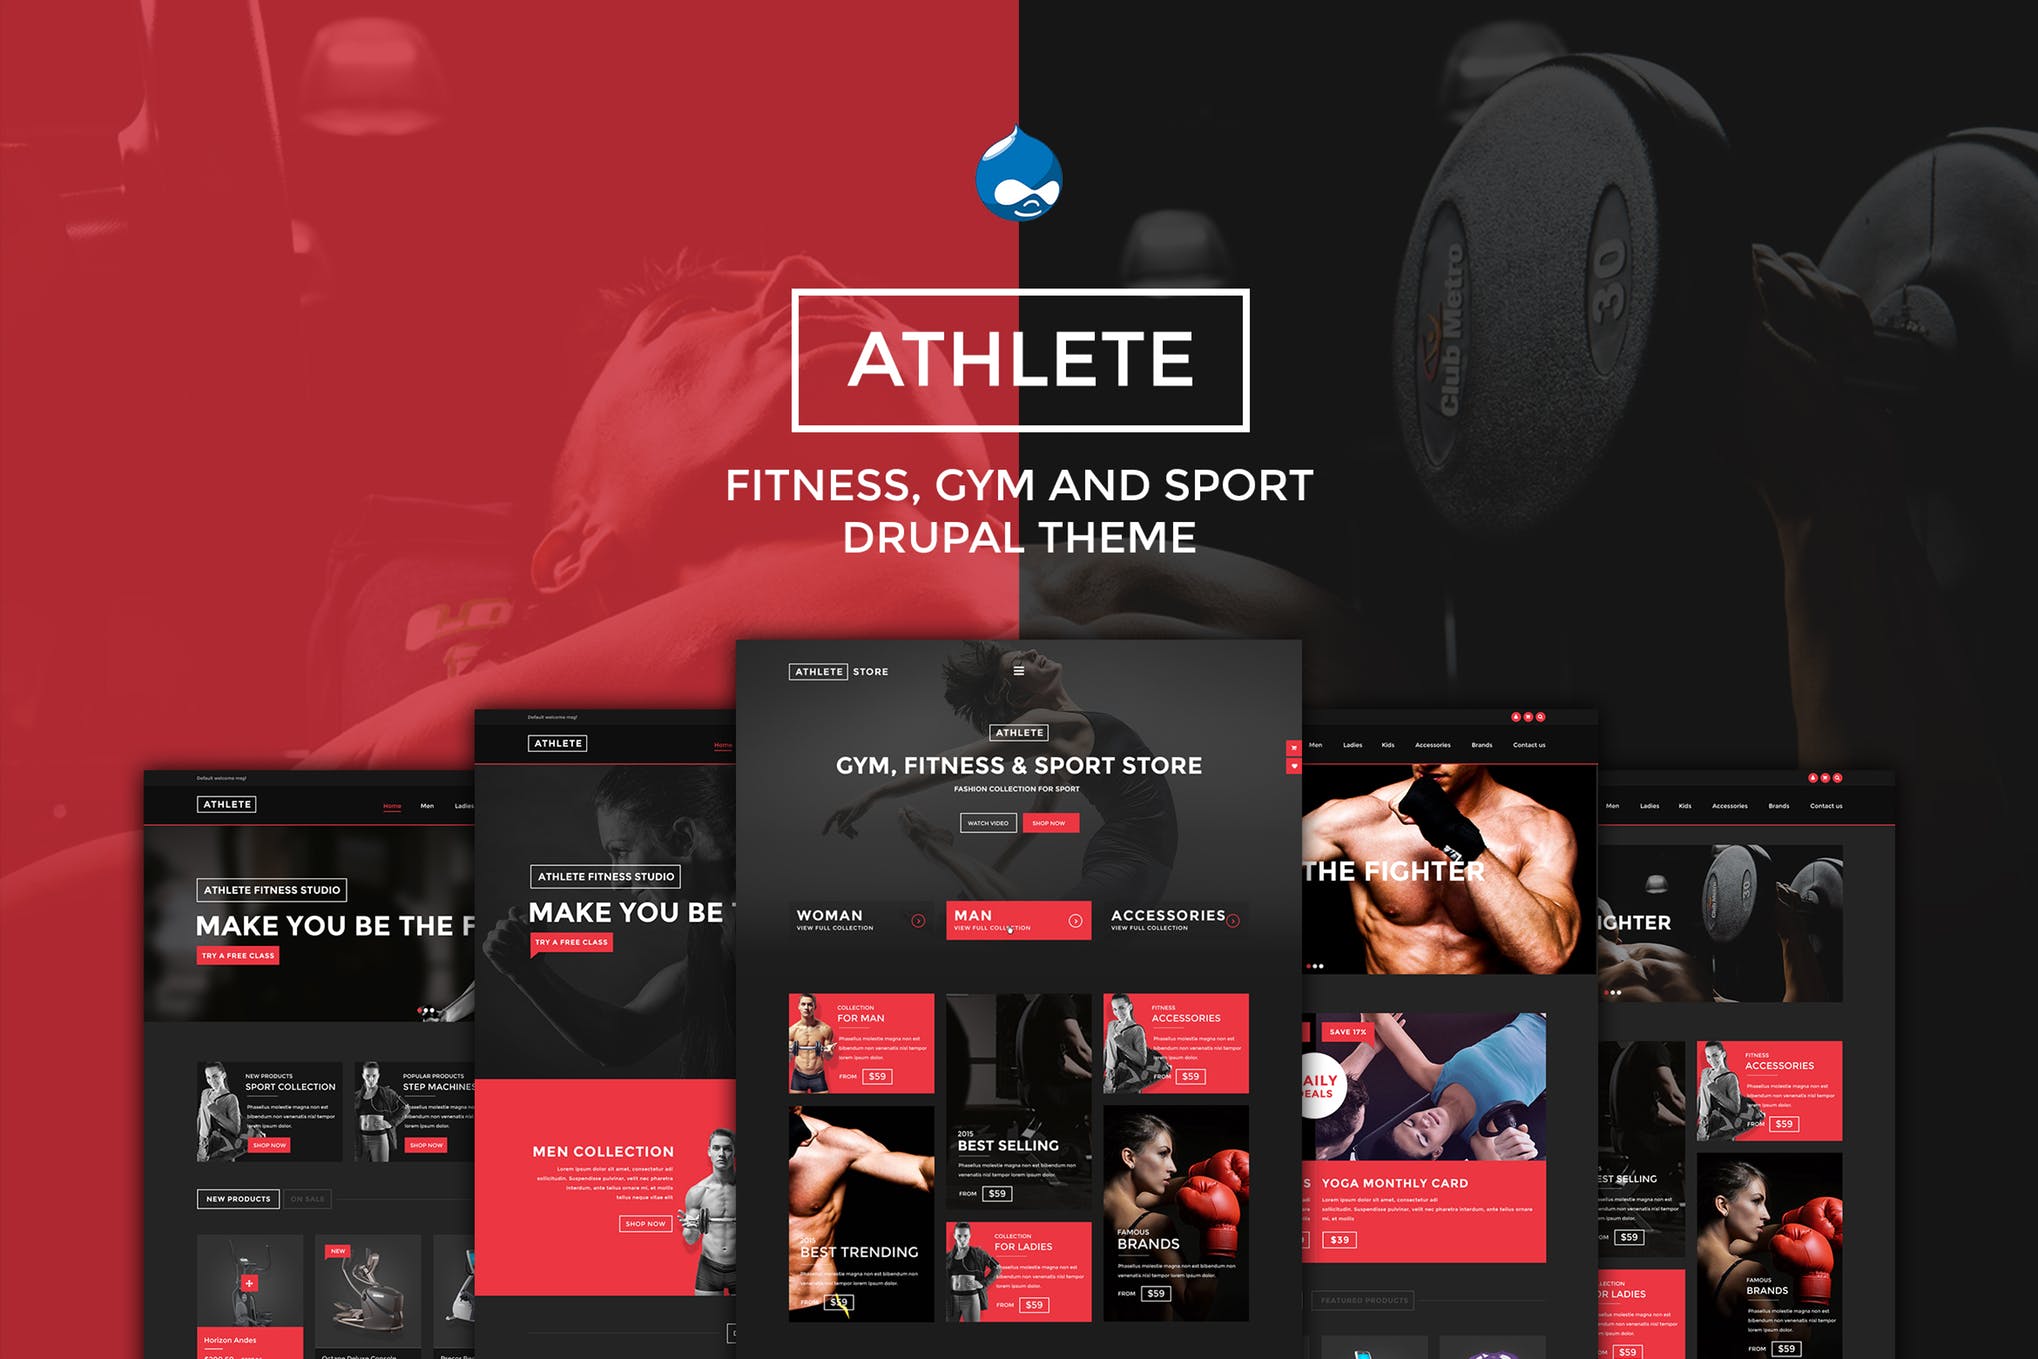 Athlete Gym and Sport Drupal theme